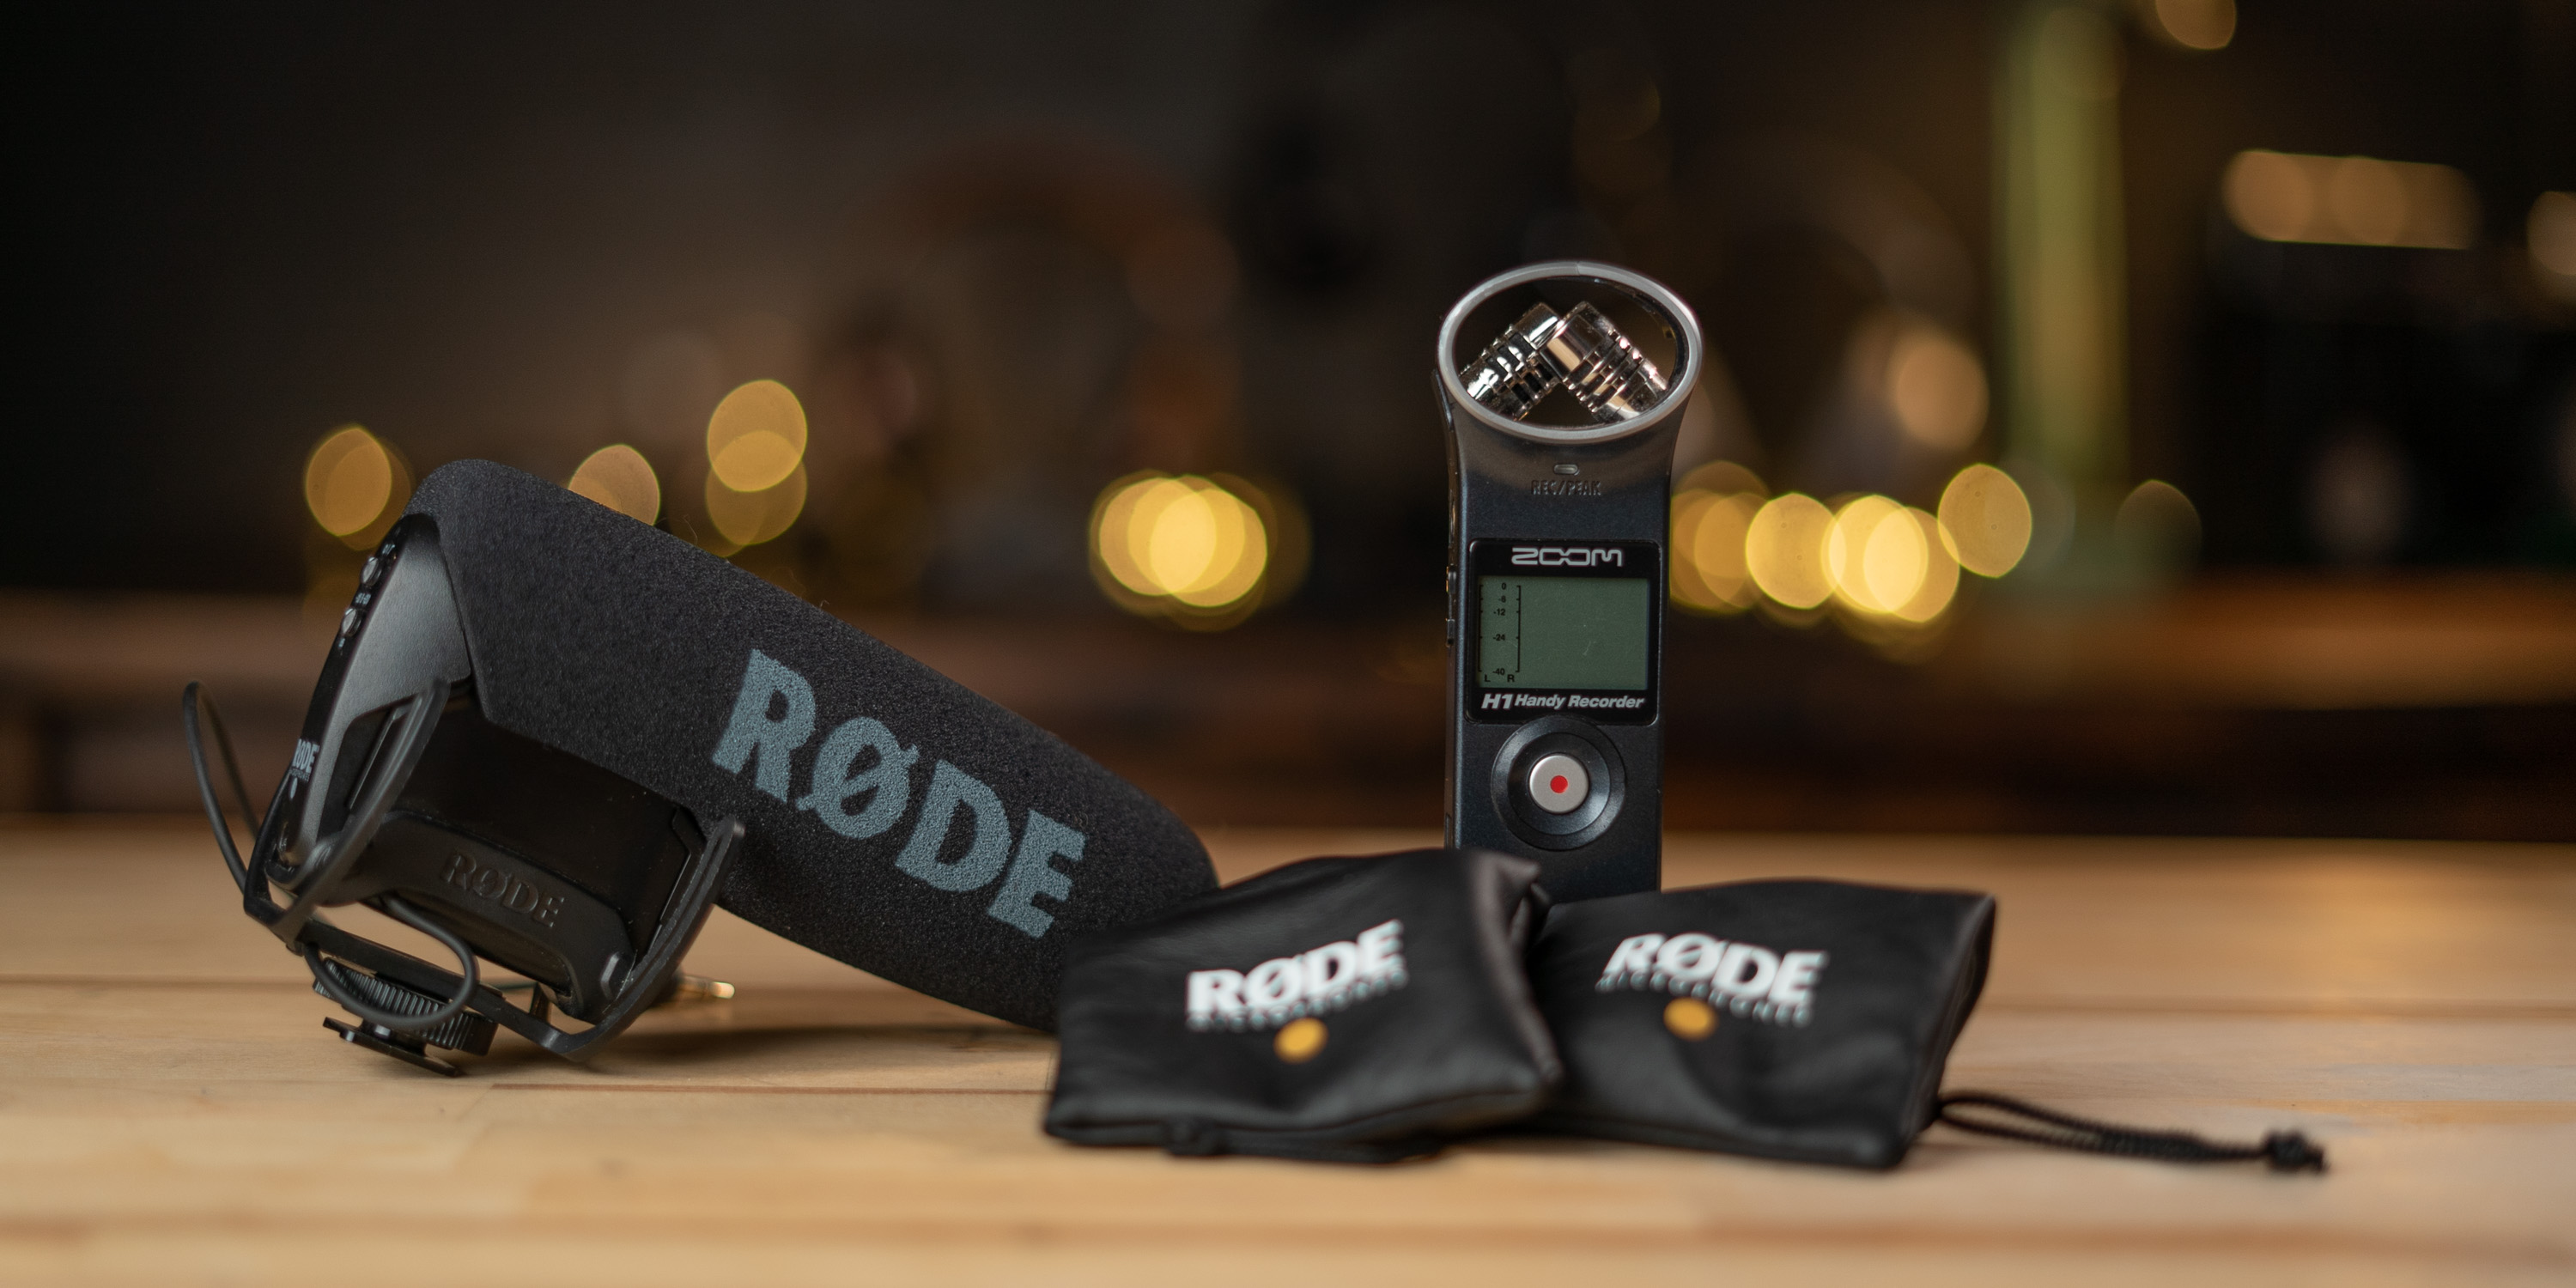 Rode Videomic Pro and Zoom H1n with Rode smartLav